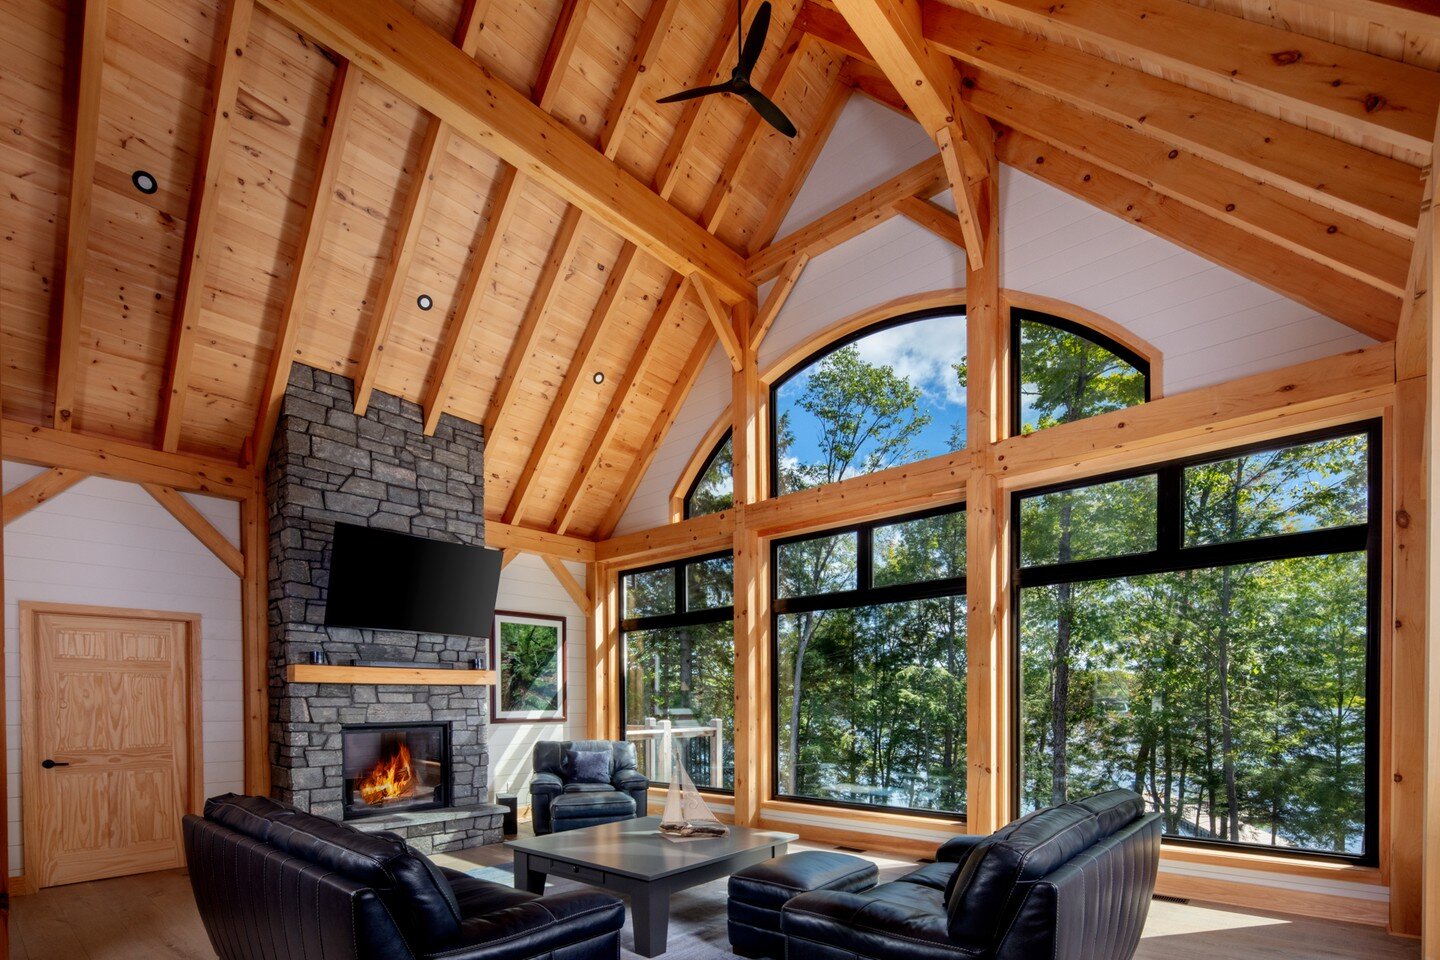 Contemporary timber lakehouse on Georgian Bay. I can never get enough of these glorious living spaces with a big view.